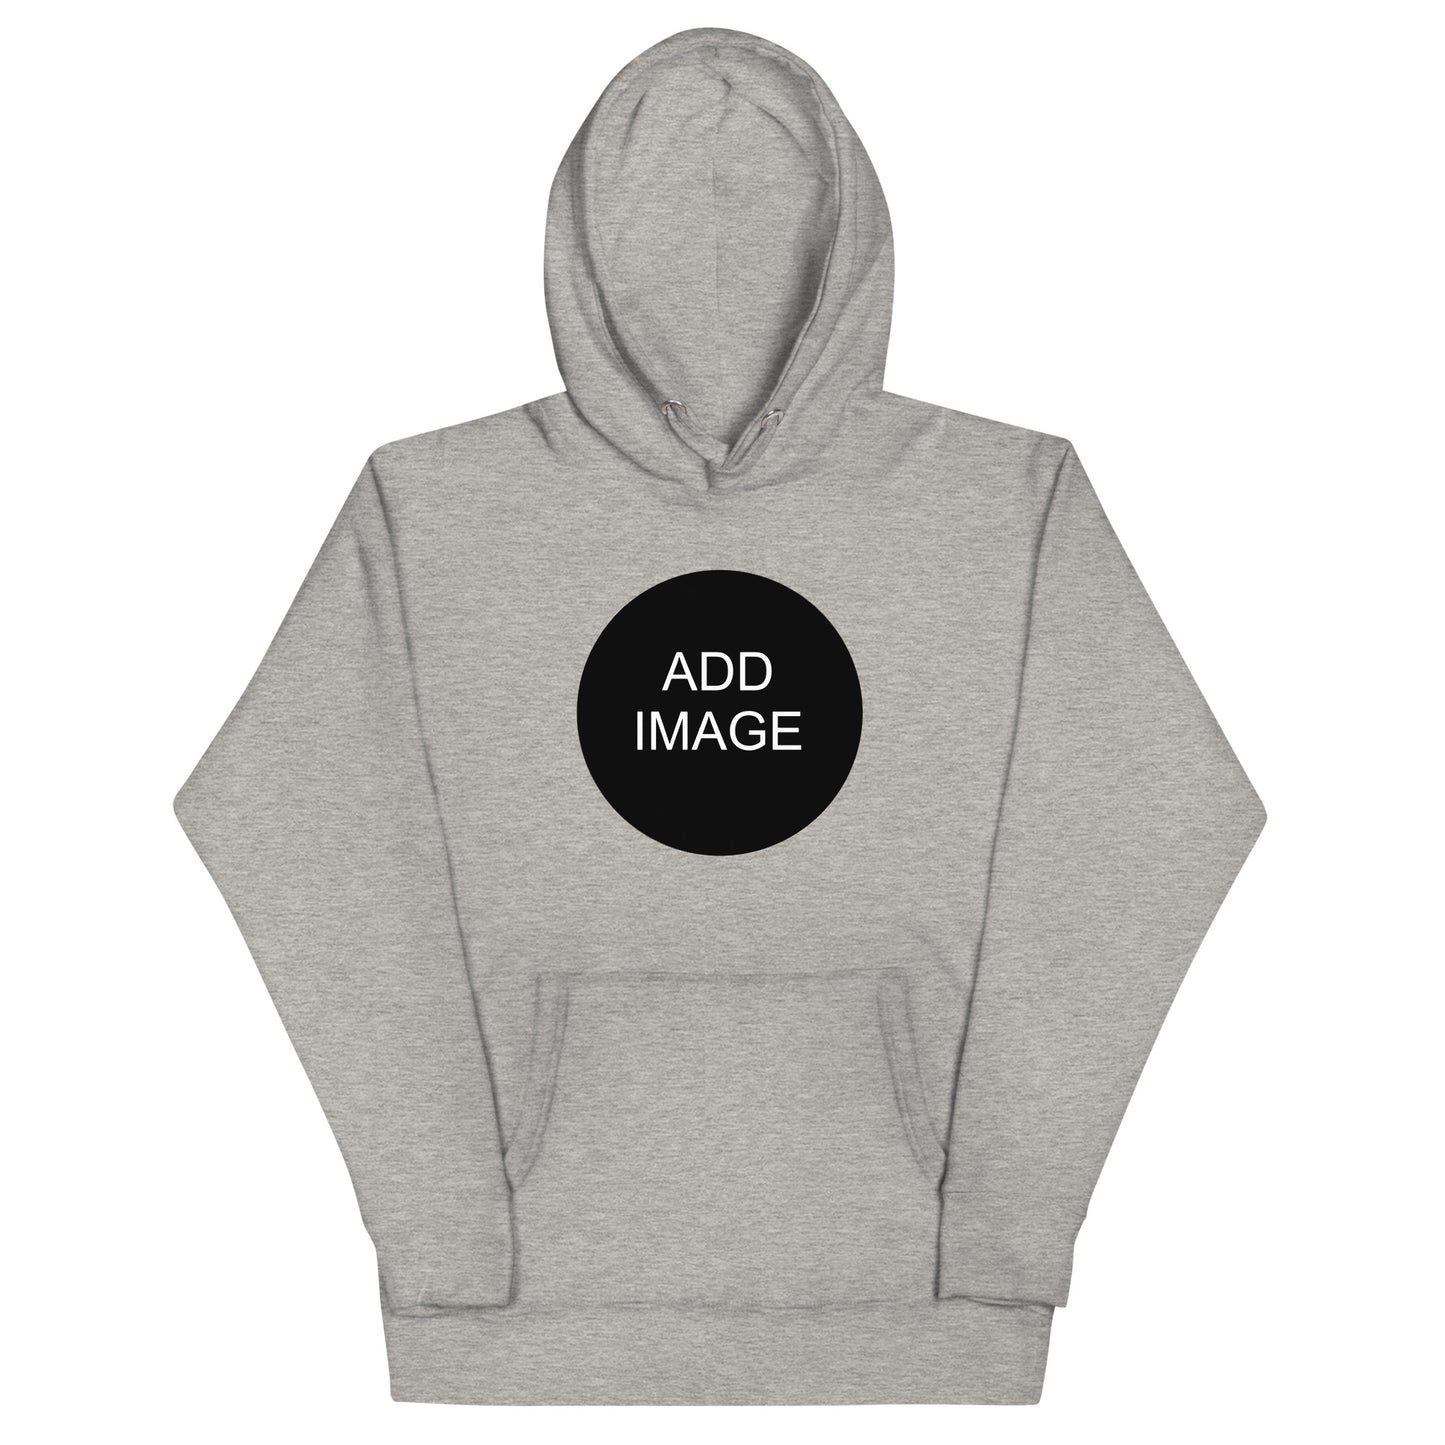 Customizable Hoodie - Front Image Only - Unisex